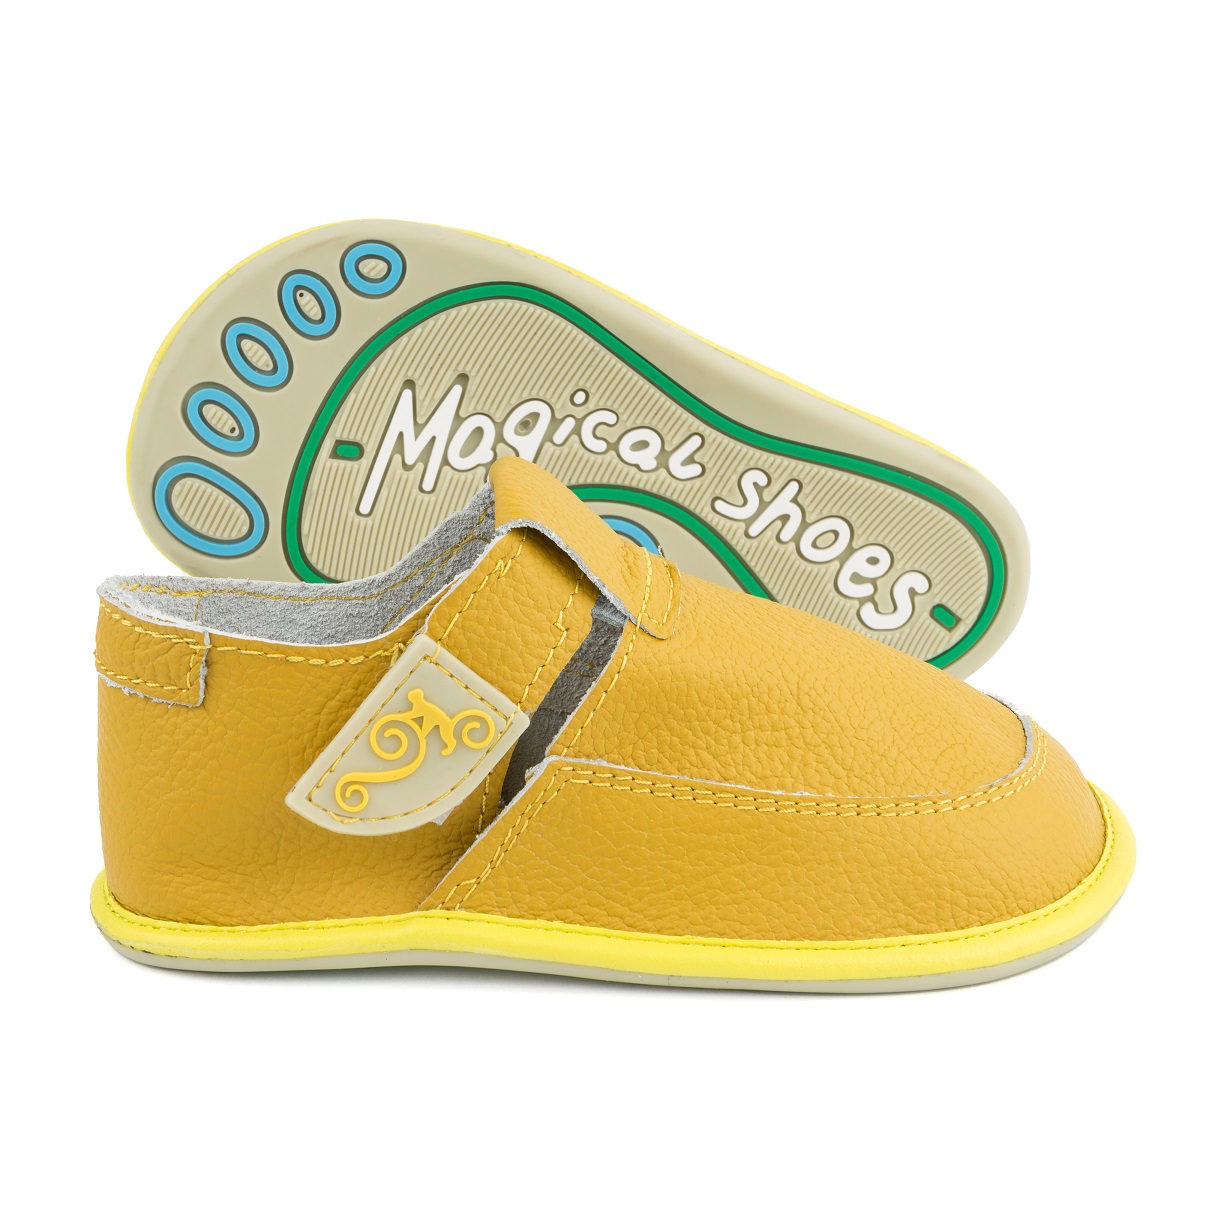 Barefoot shoes for kids LULU YELLOW - Magical Shoes